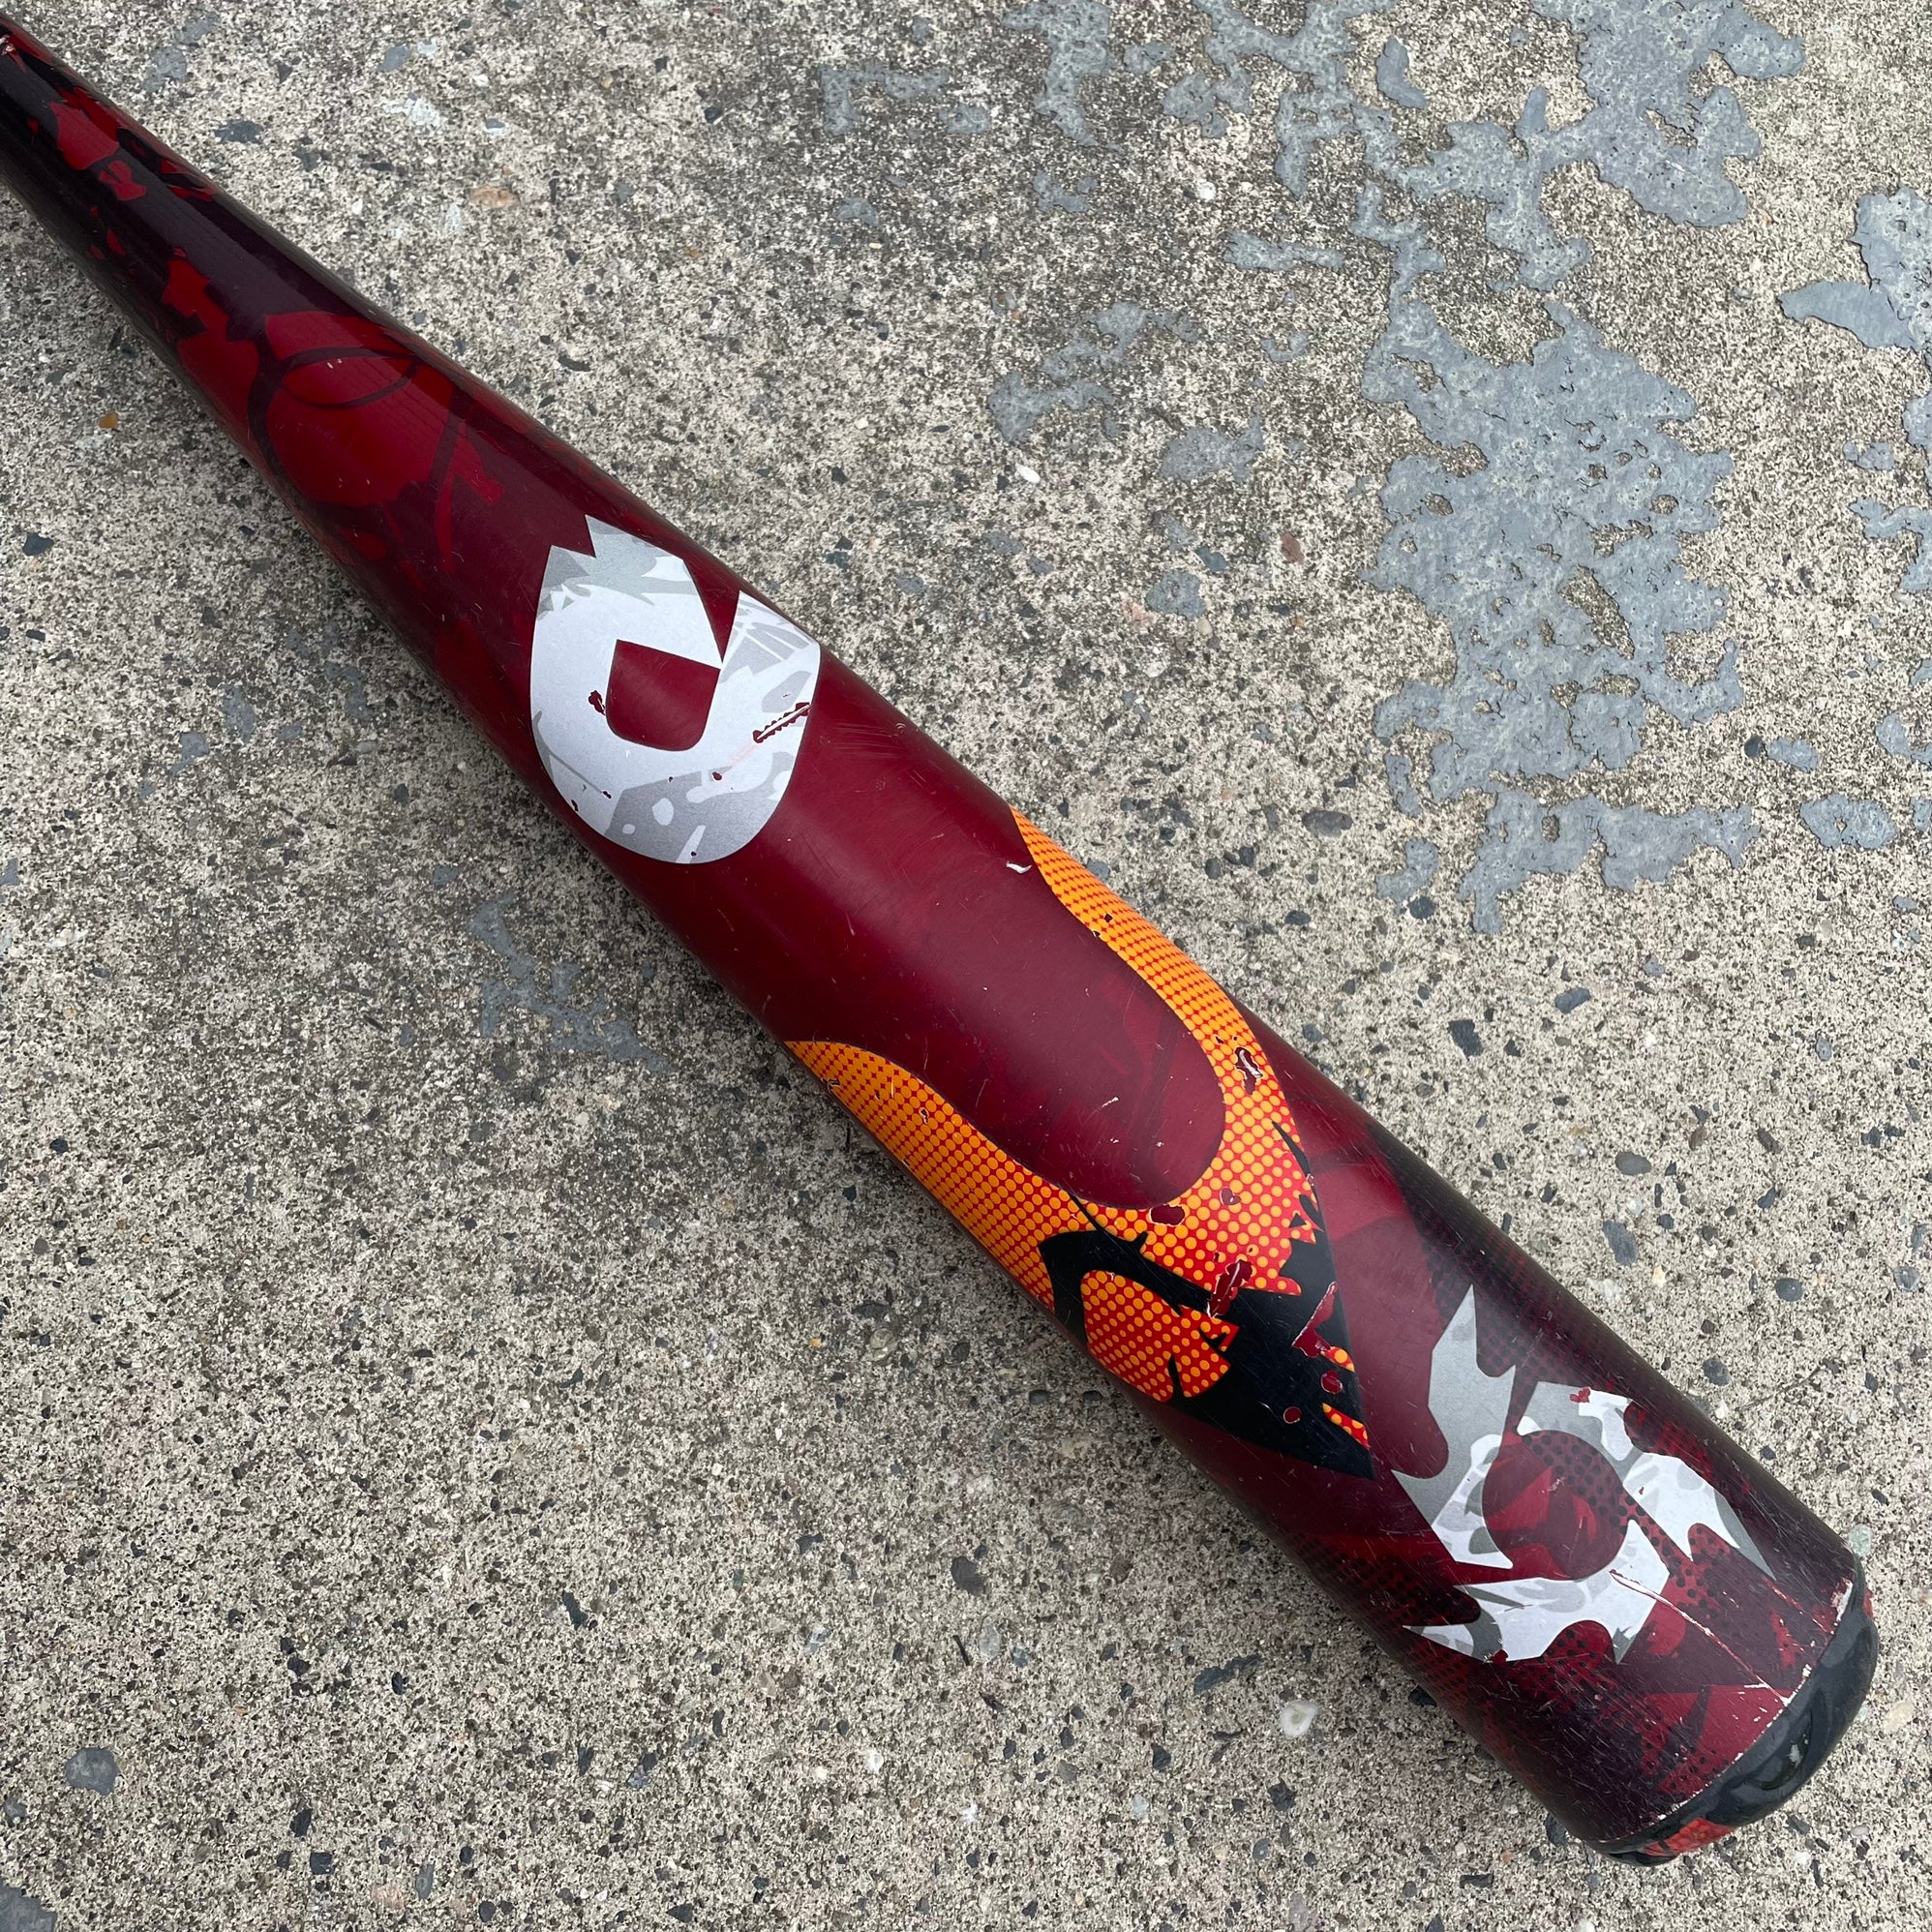 New in wrapper with a valid dealer receipt 2021 DeMarini Voodoo One 33" 30 -3